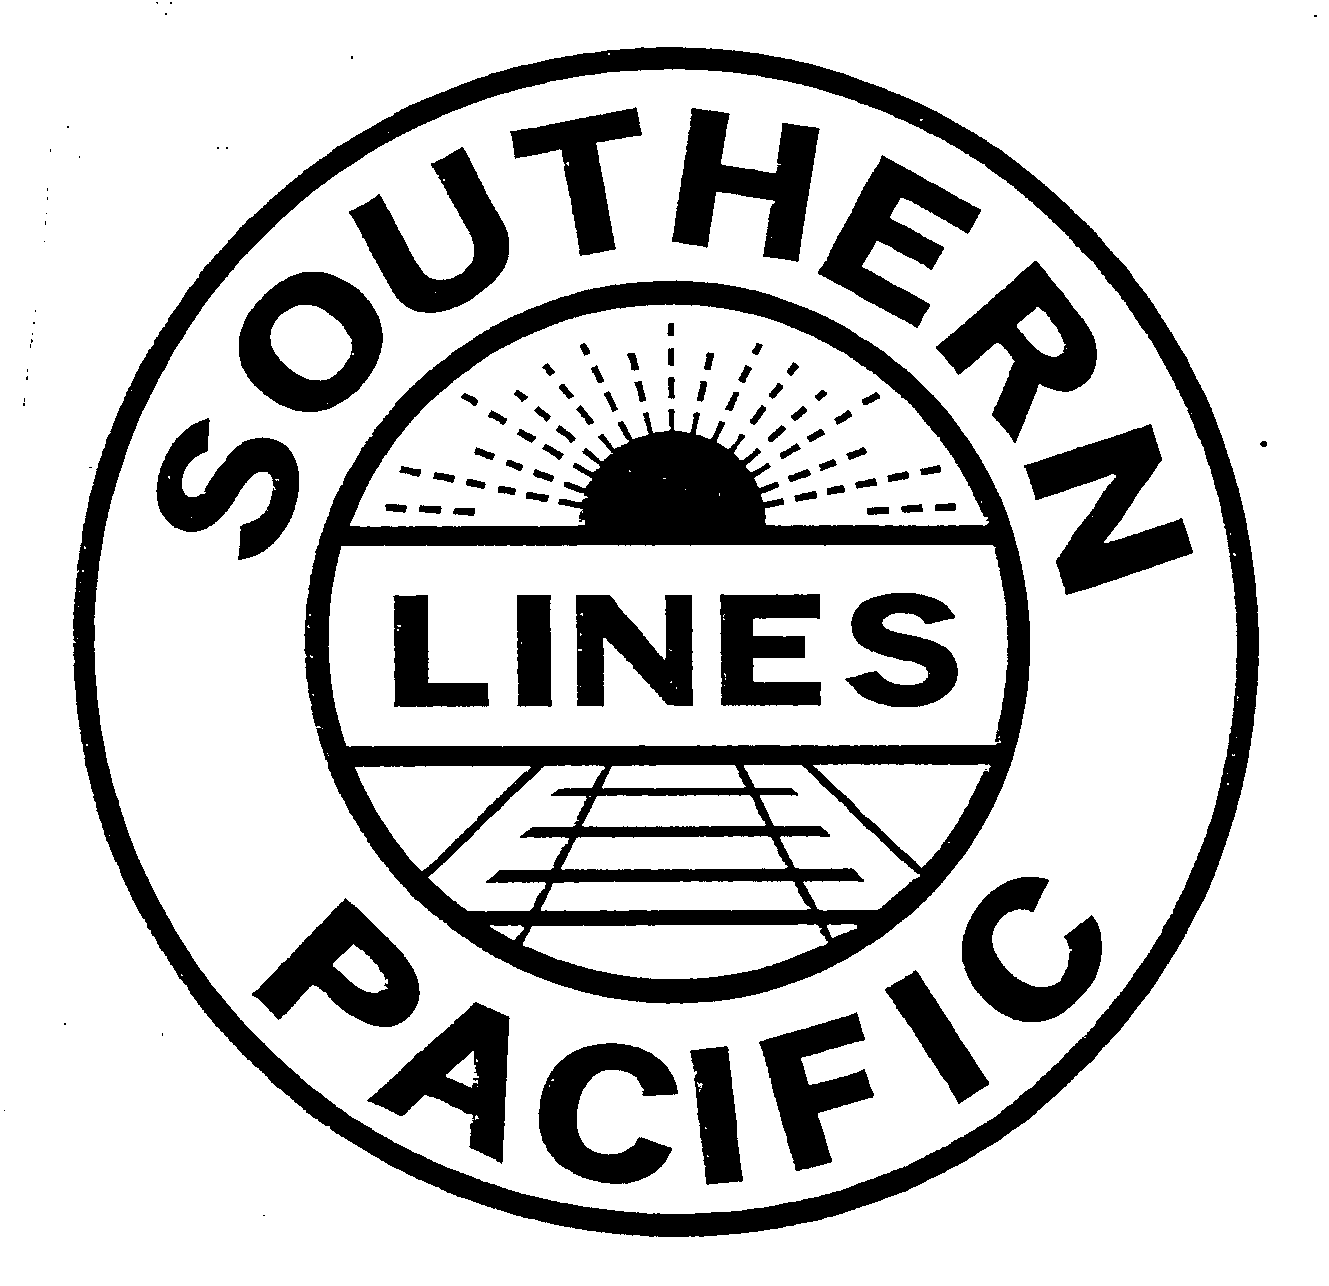  SOUTHERN PACIFIC LINES